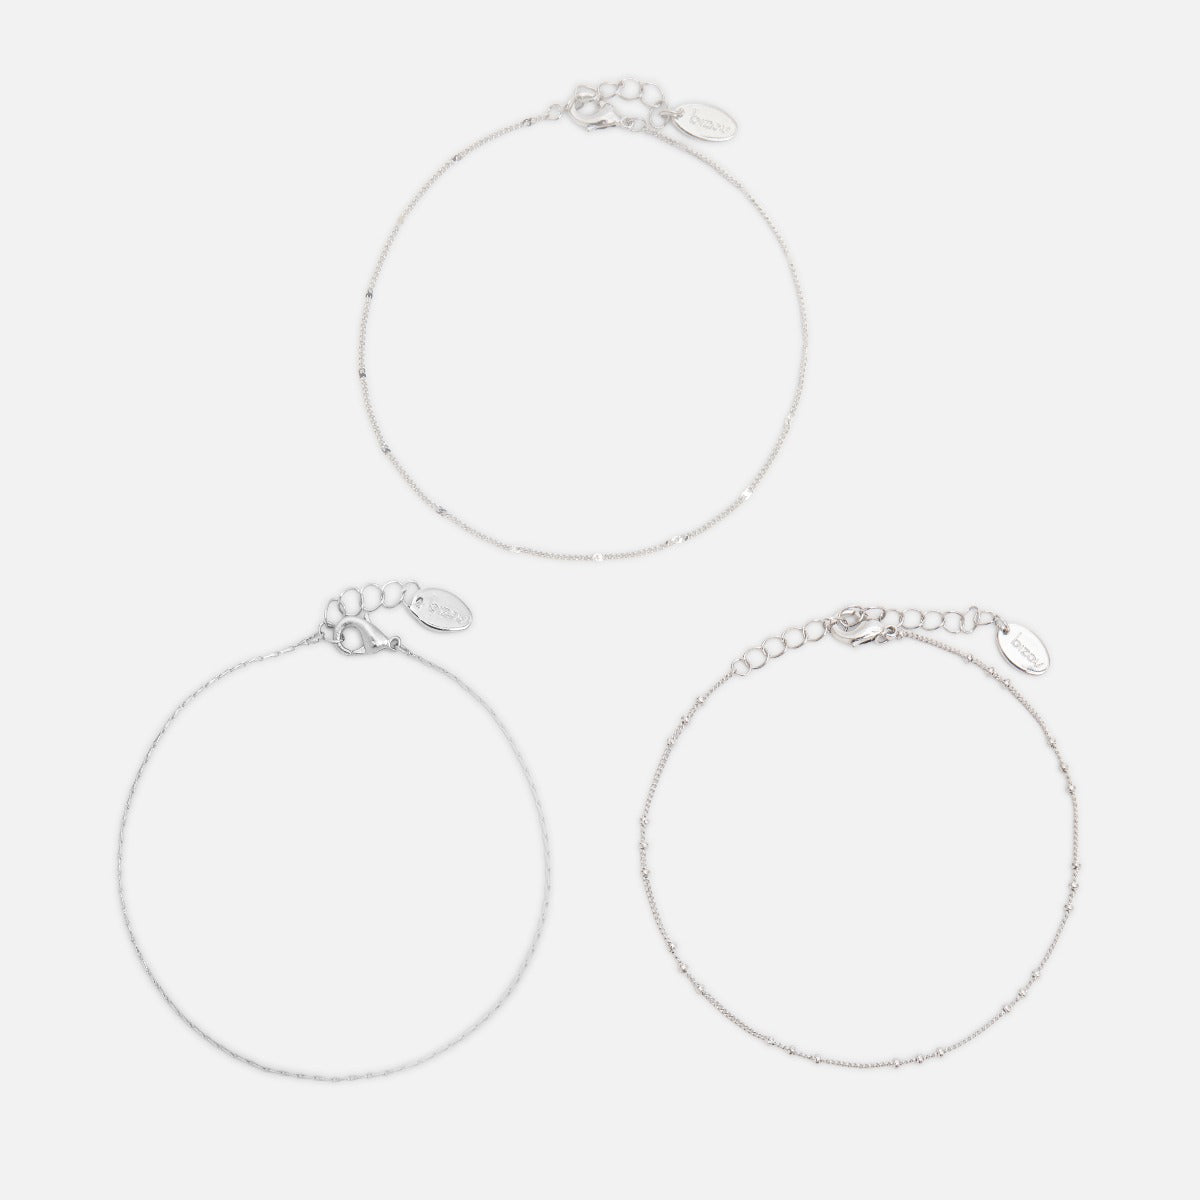 Set of three silvered delicate mesh ankle chains